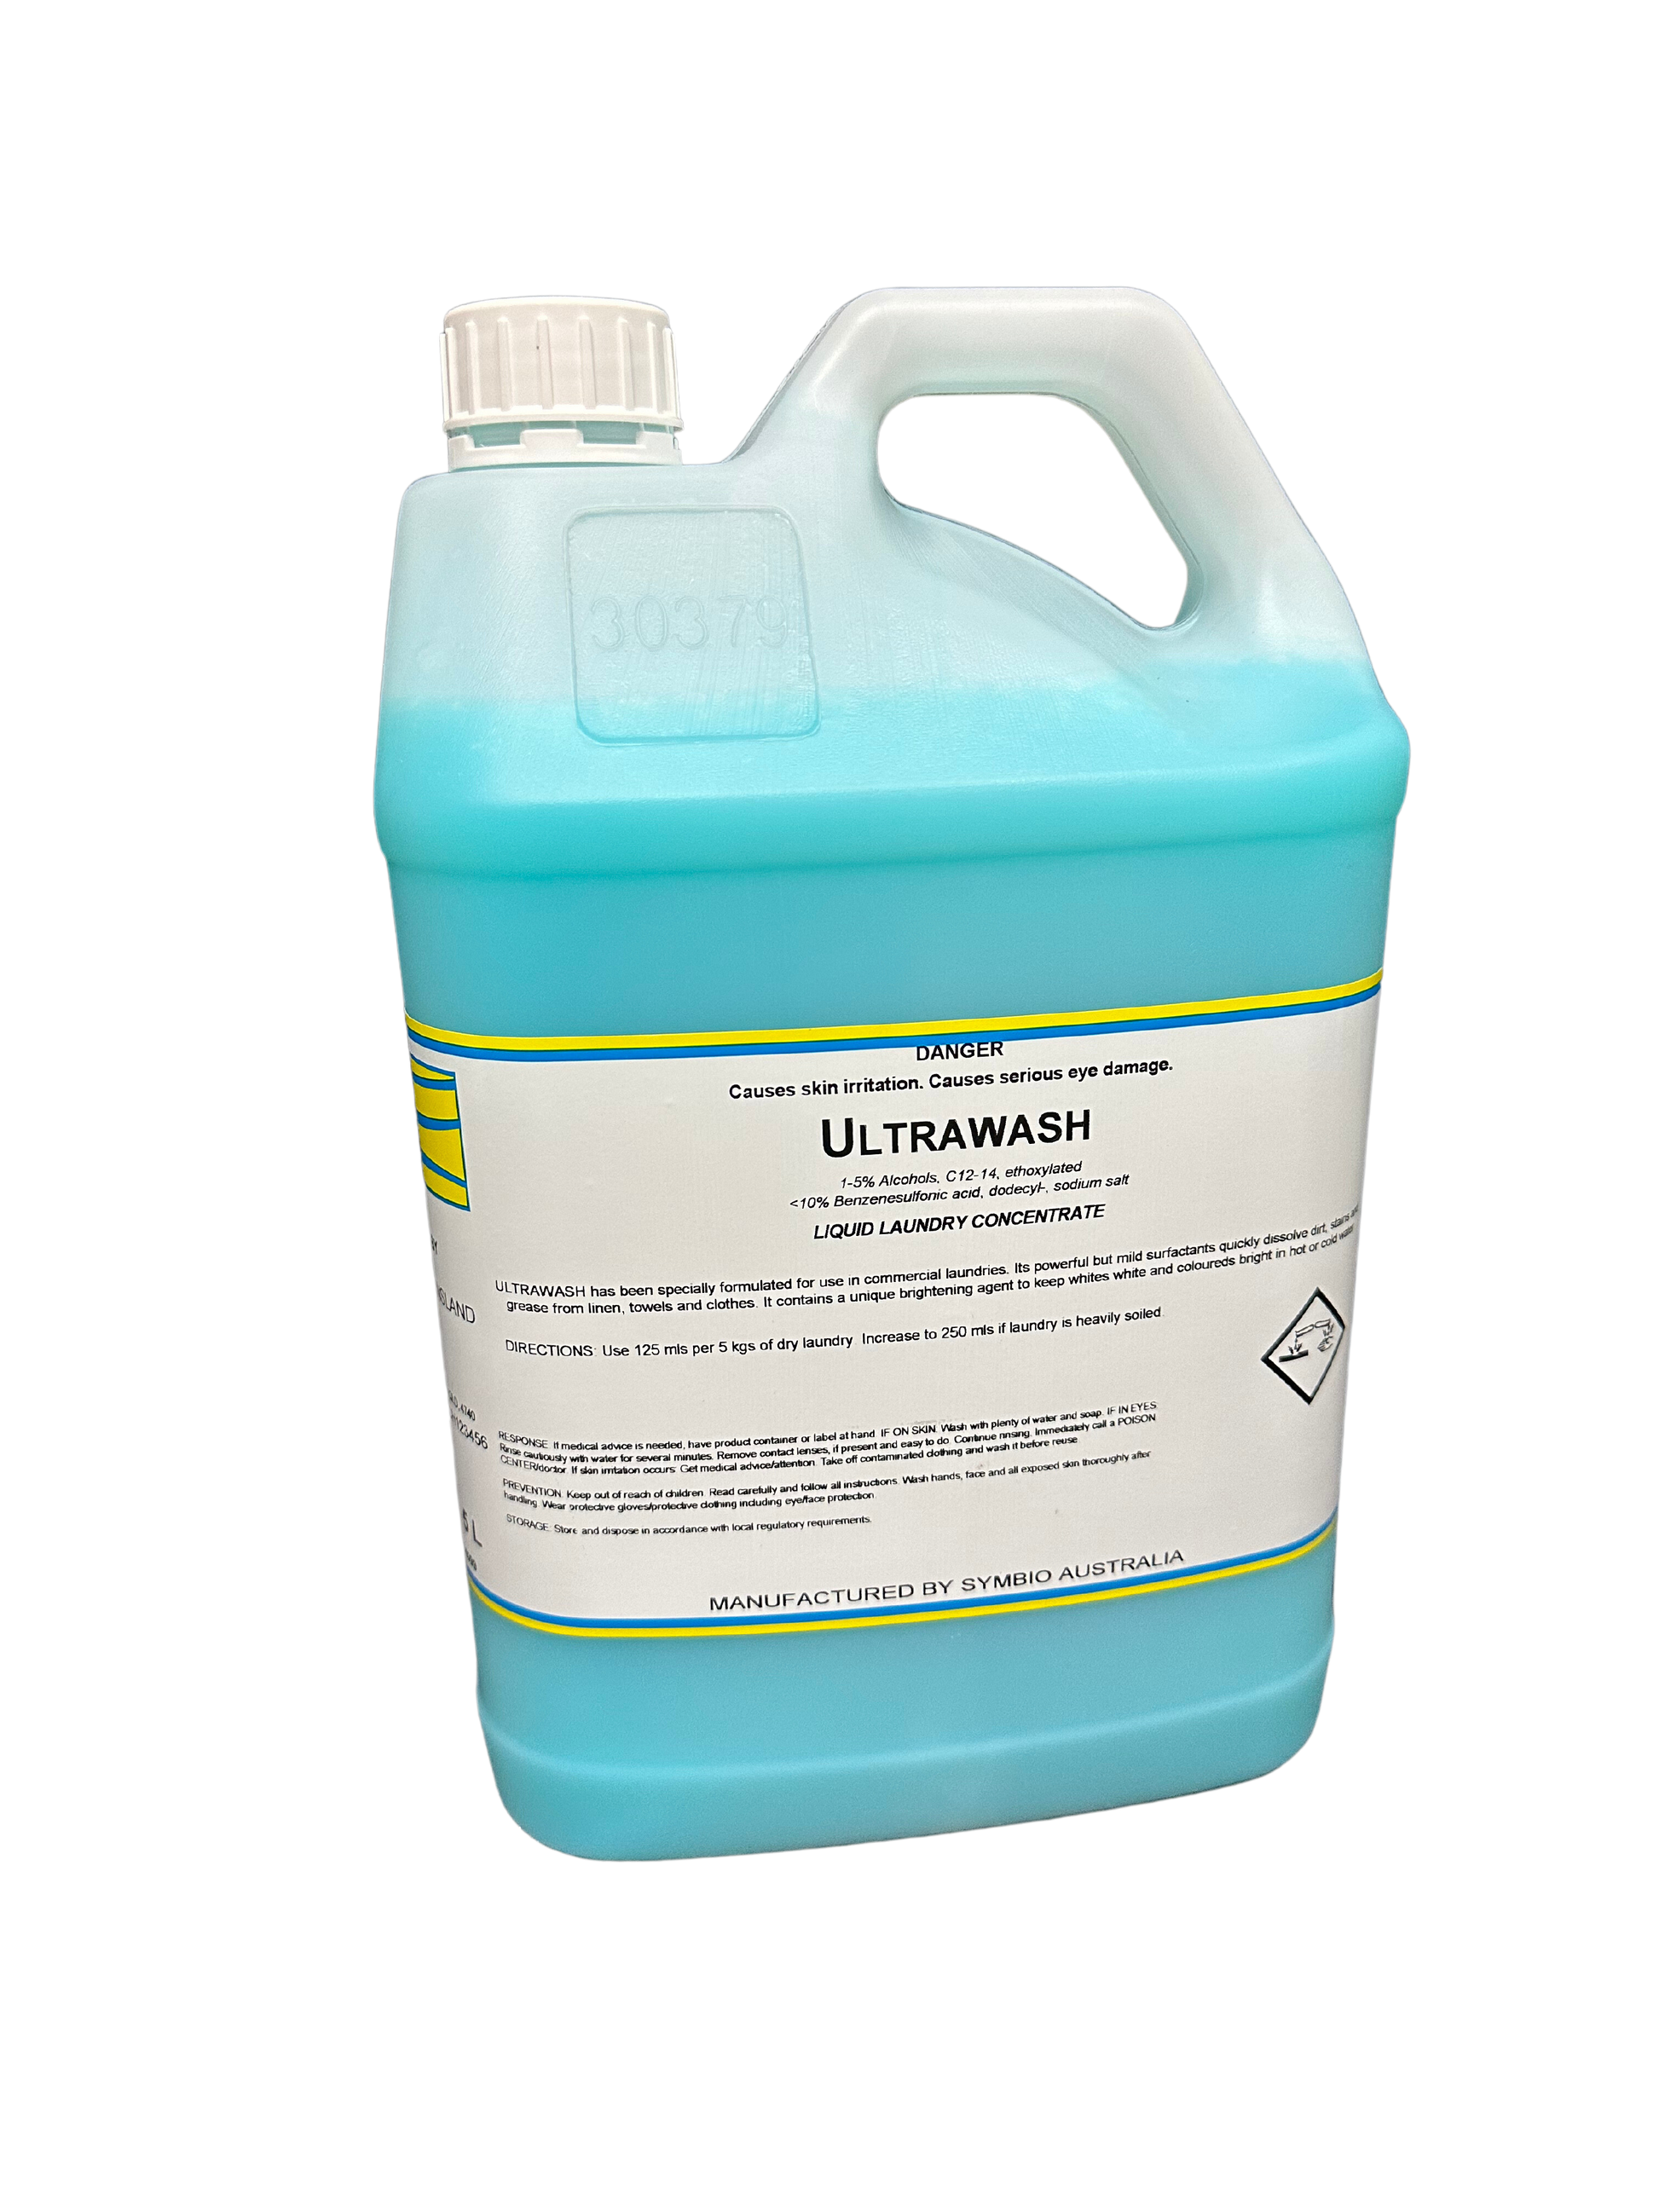 It has been specifically formulated to use in commercial laundries. It's powerful but mild surfactants quickly dissolve dirt, stains and grease from linen, towels and clothes. It contains a unique brightening agent to keep whites white and colours bright. Is suitable for hot and cold water.  NOTE: Biodegradable, Phosphate-Free, Septic Safe. Mackay